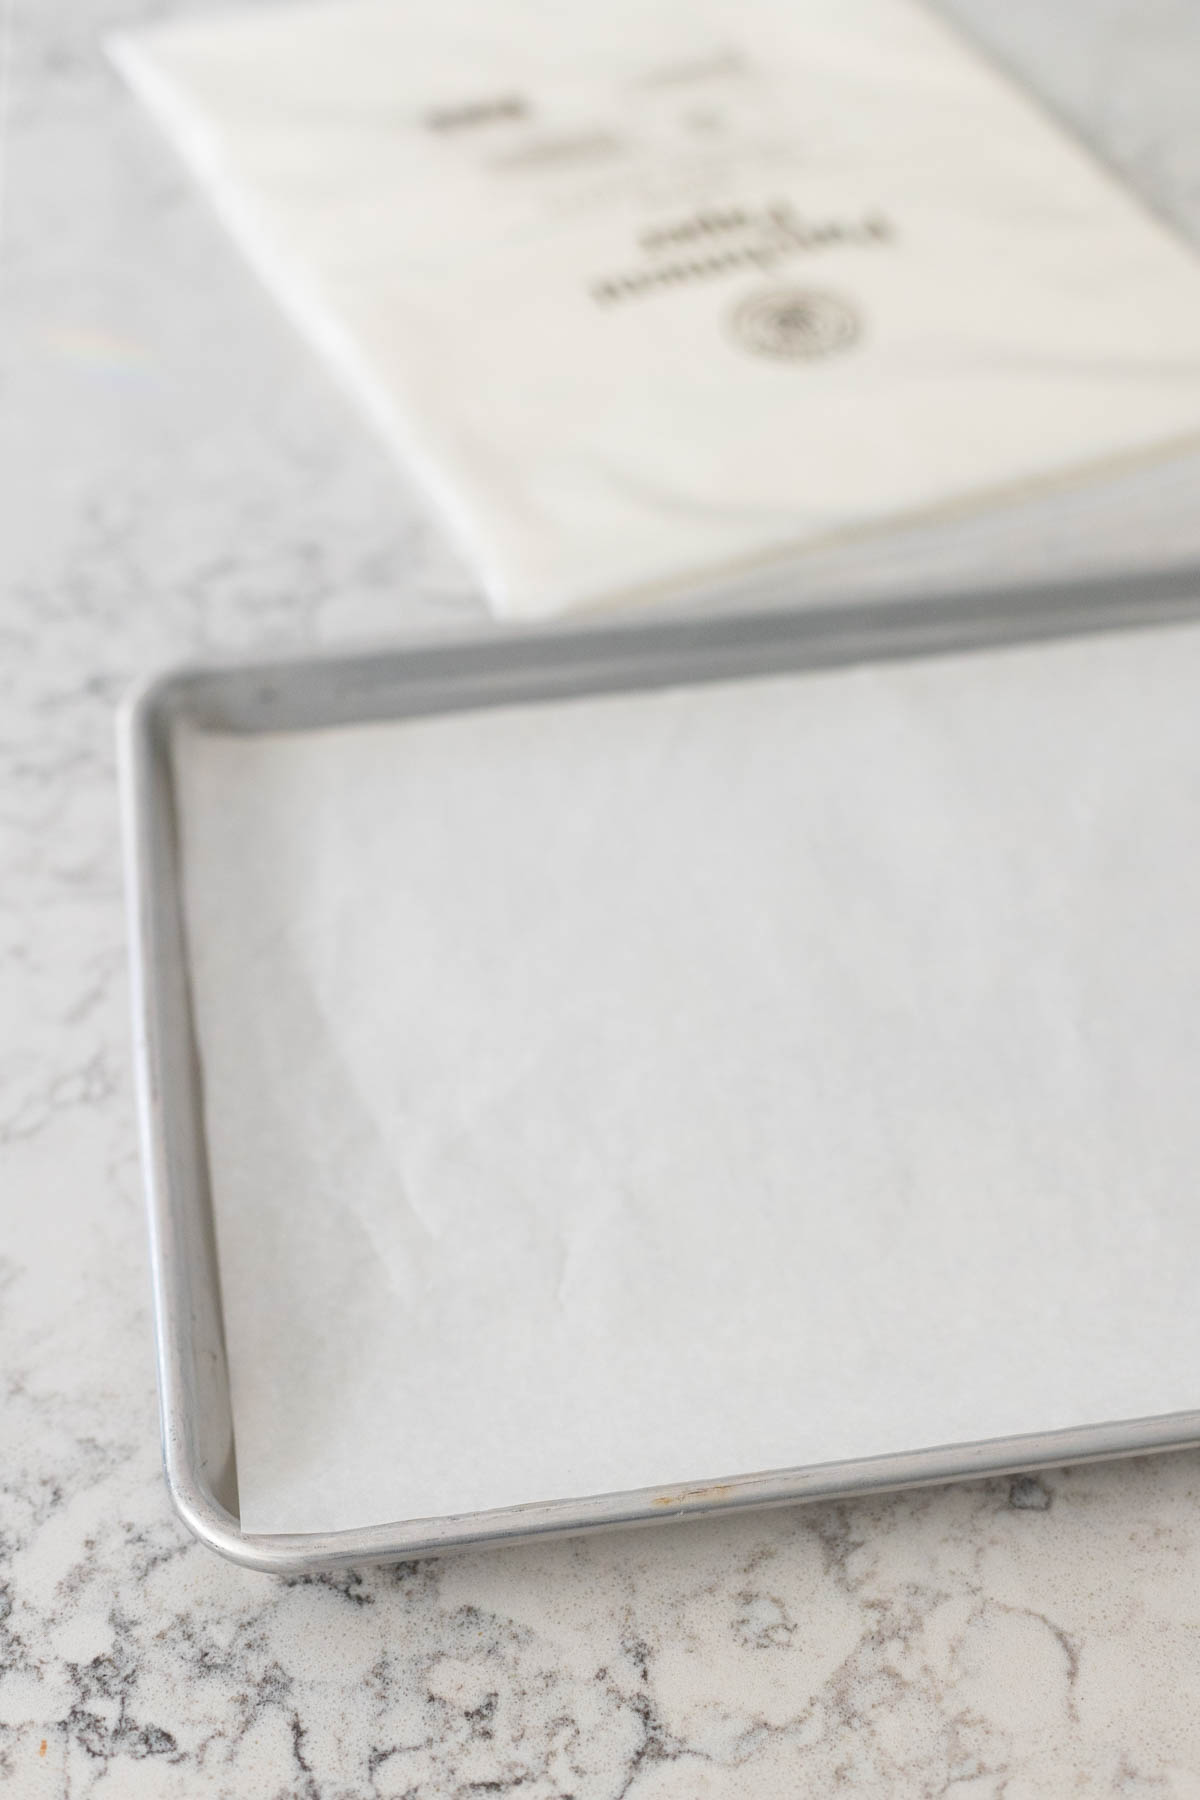 Pre-cut parchment paper is placed on a metal pan.